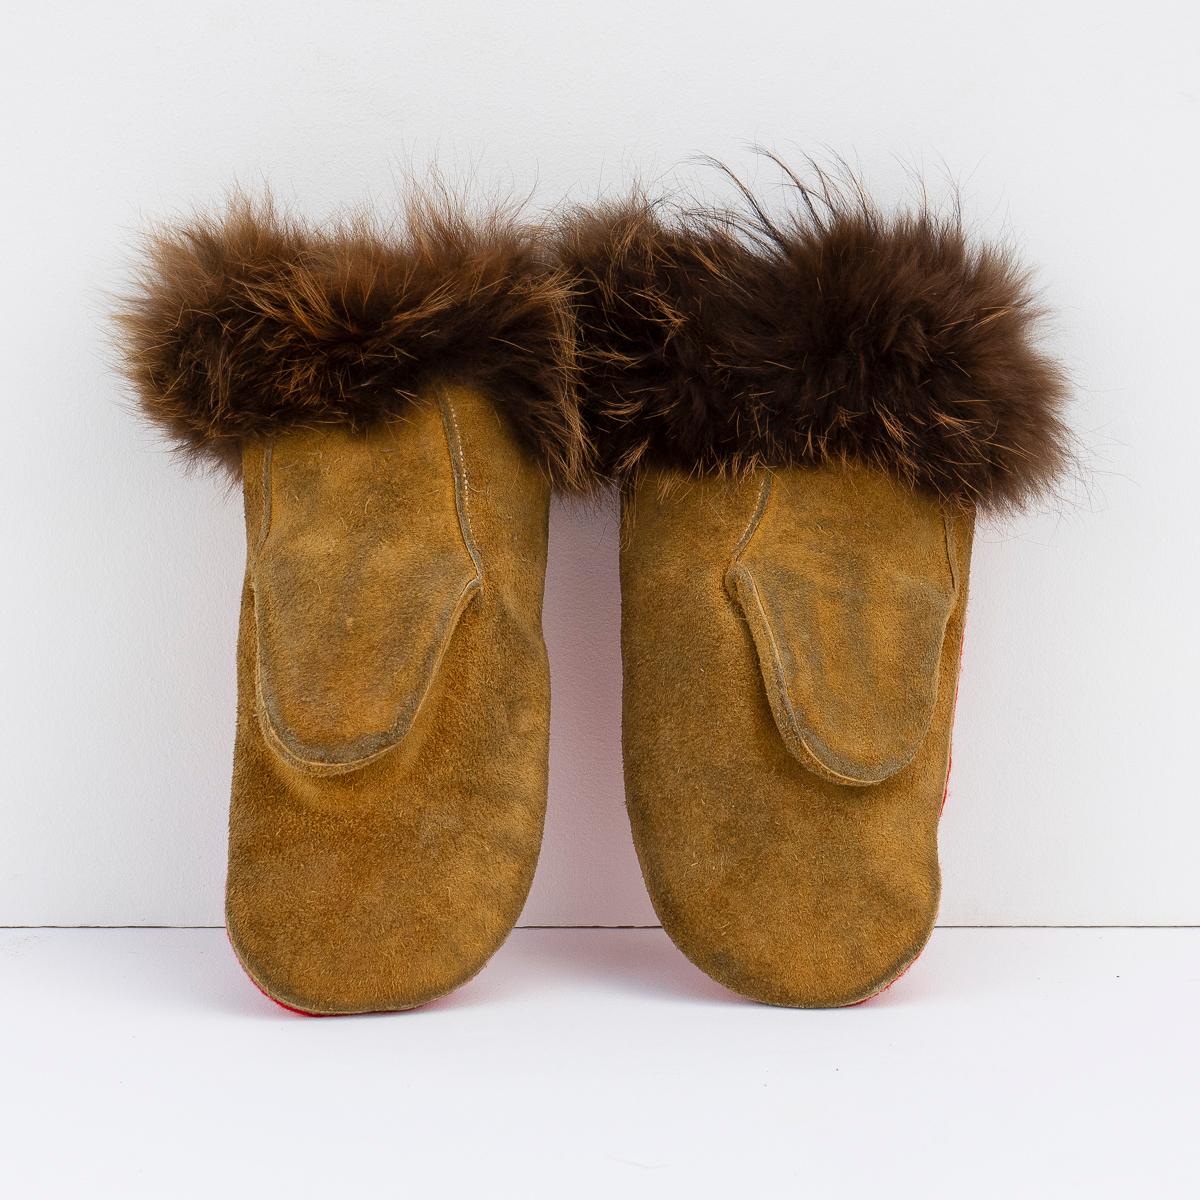 Vintage Ojibwe Beaded Felt and Moose Skin Gauntlet Mittens, 1950s First Nations In Good Condition For Sale In Bristol, GB